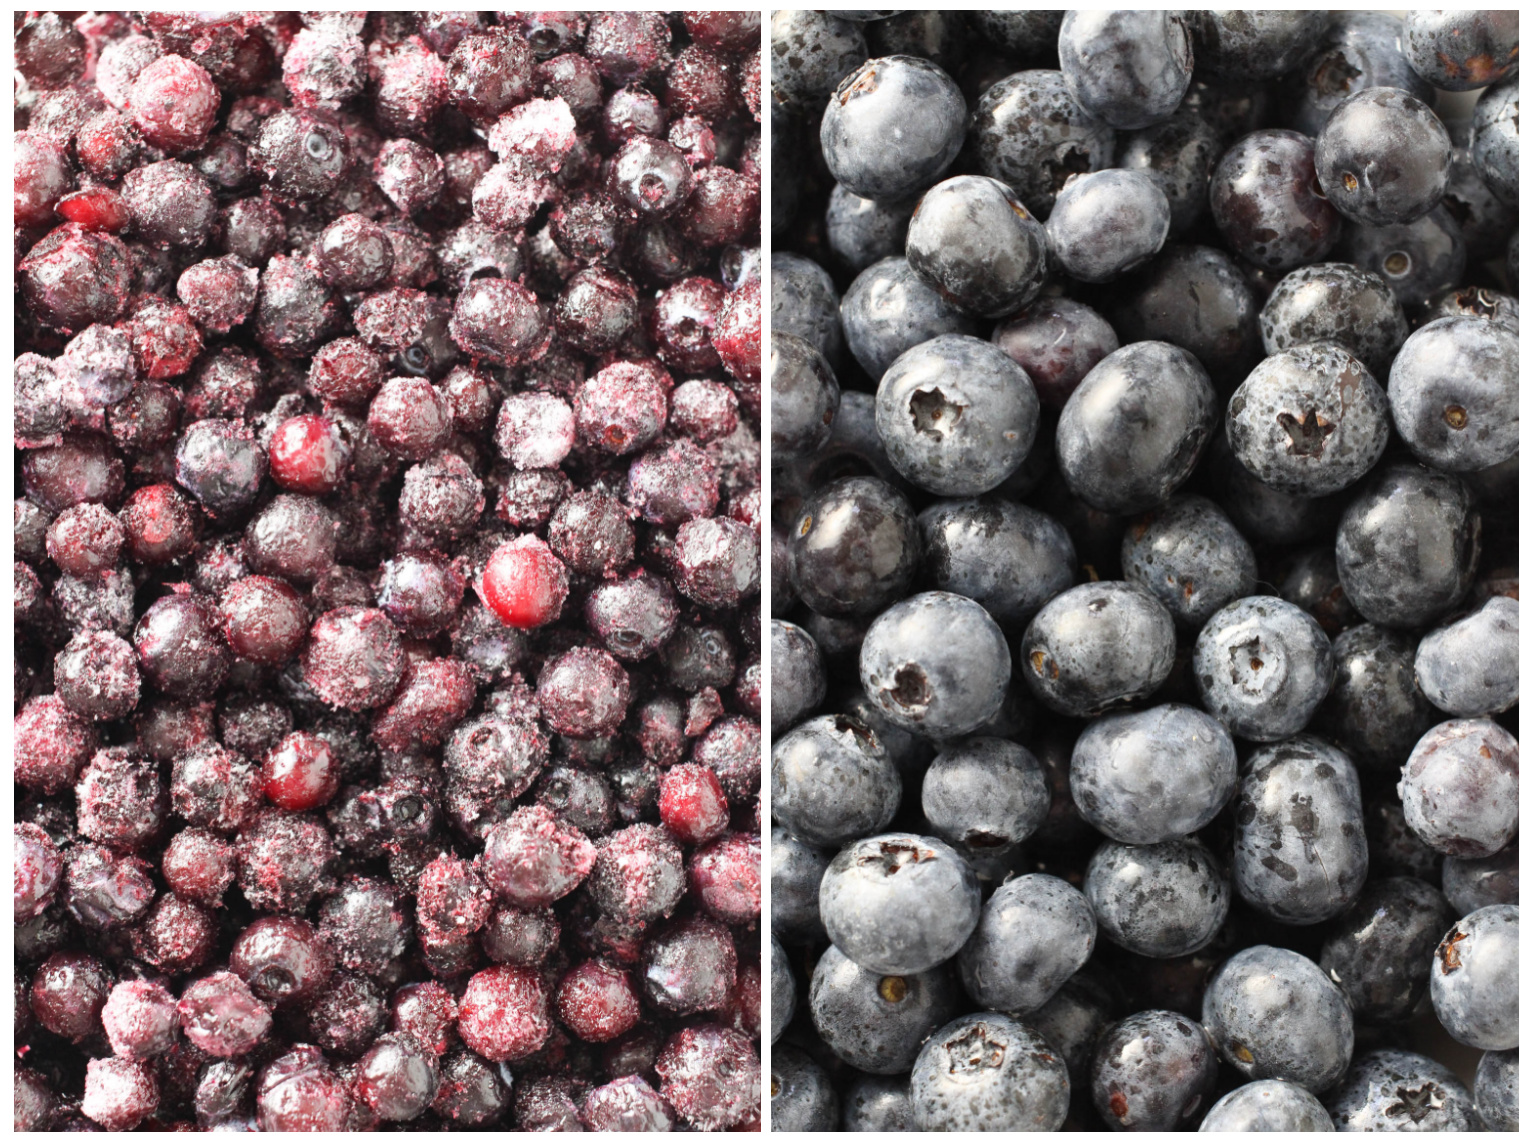 Two images side by side. Frozen blueberries on the left image, fresh blueberries on the right image.